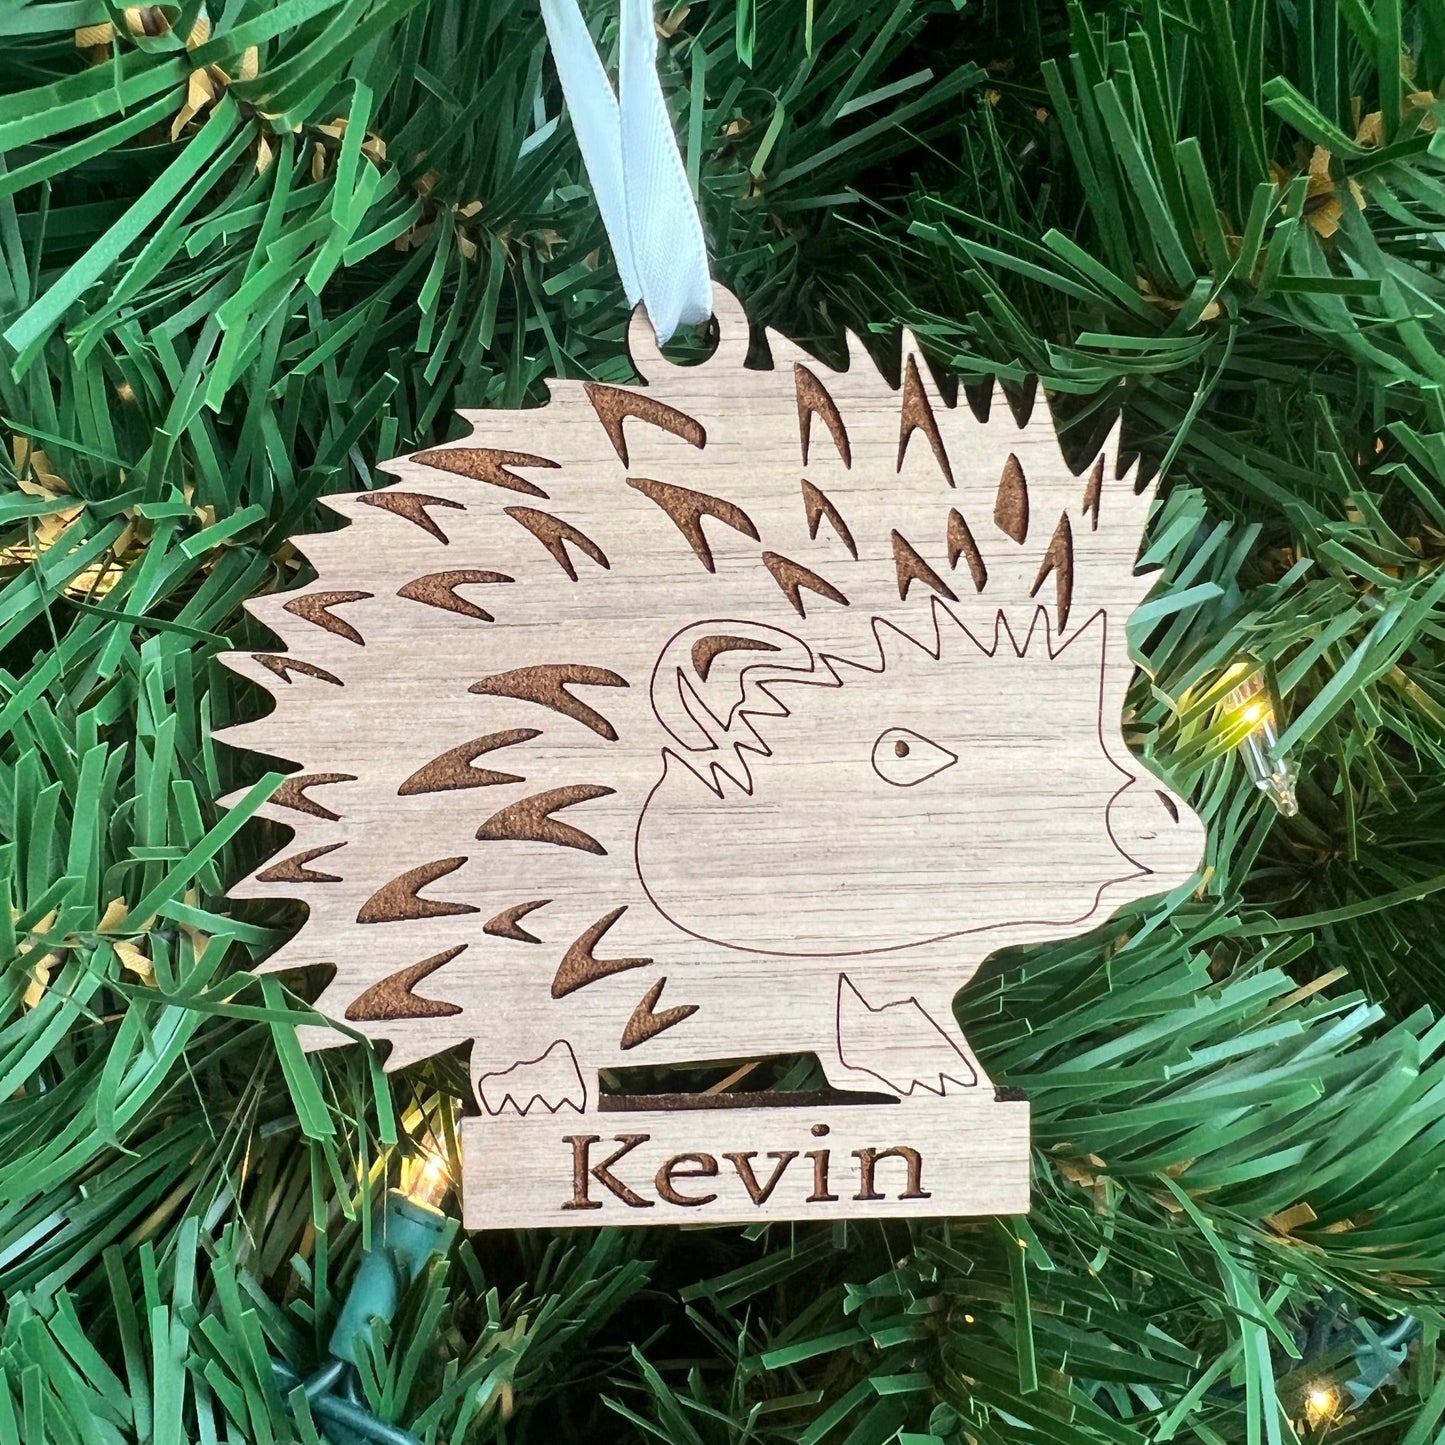 Personalized Hedgehog Ornaments